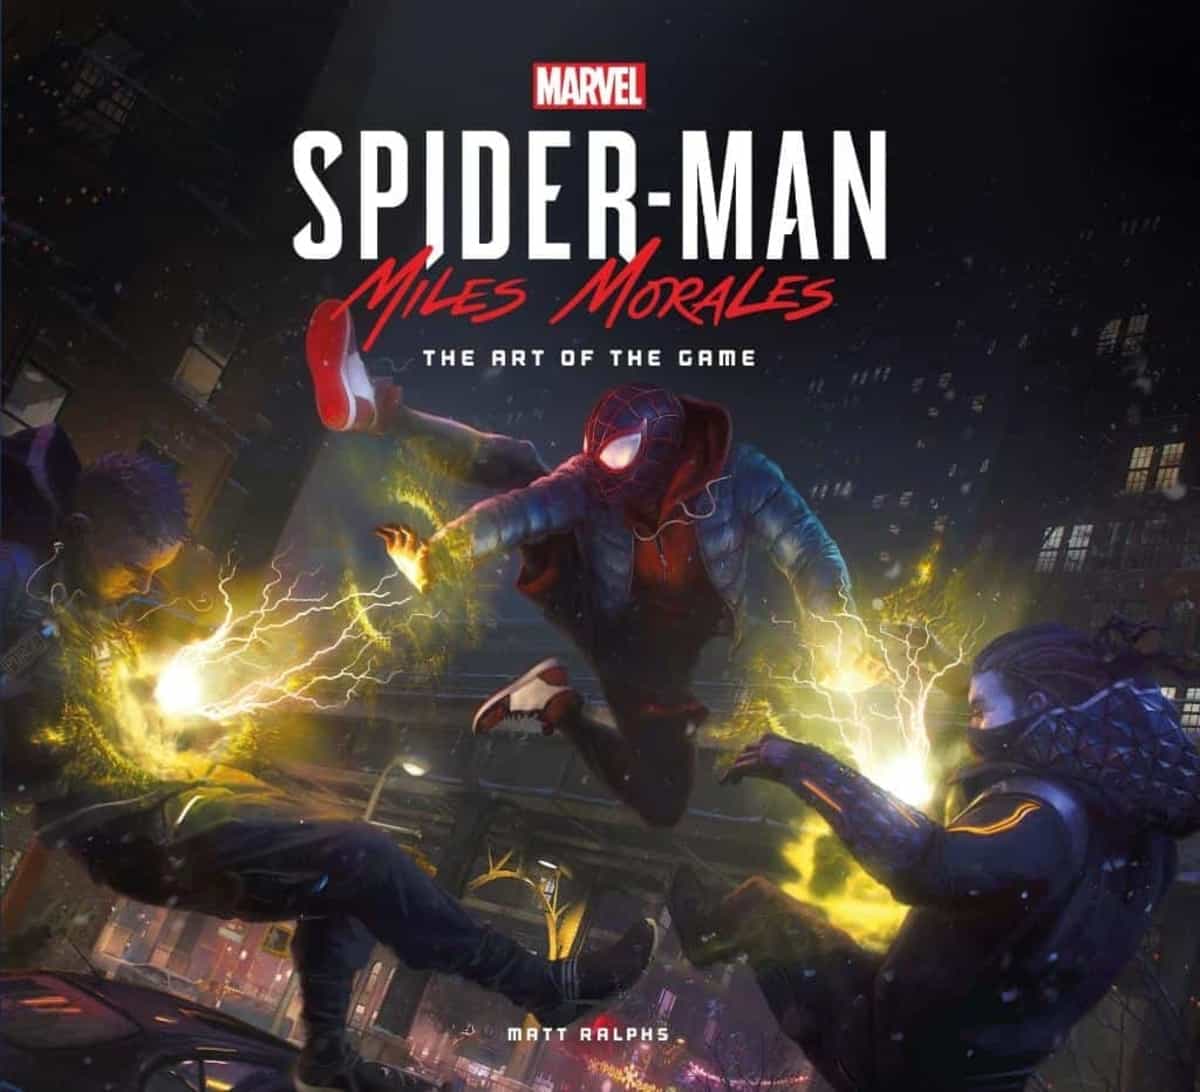 Marvel's Spider-Man: Miles Morales Art of the Game